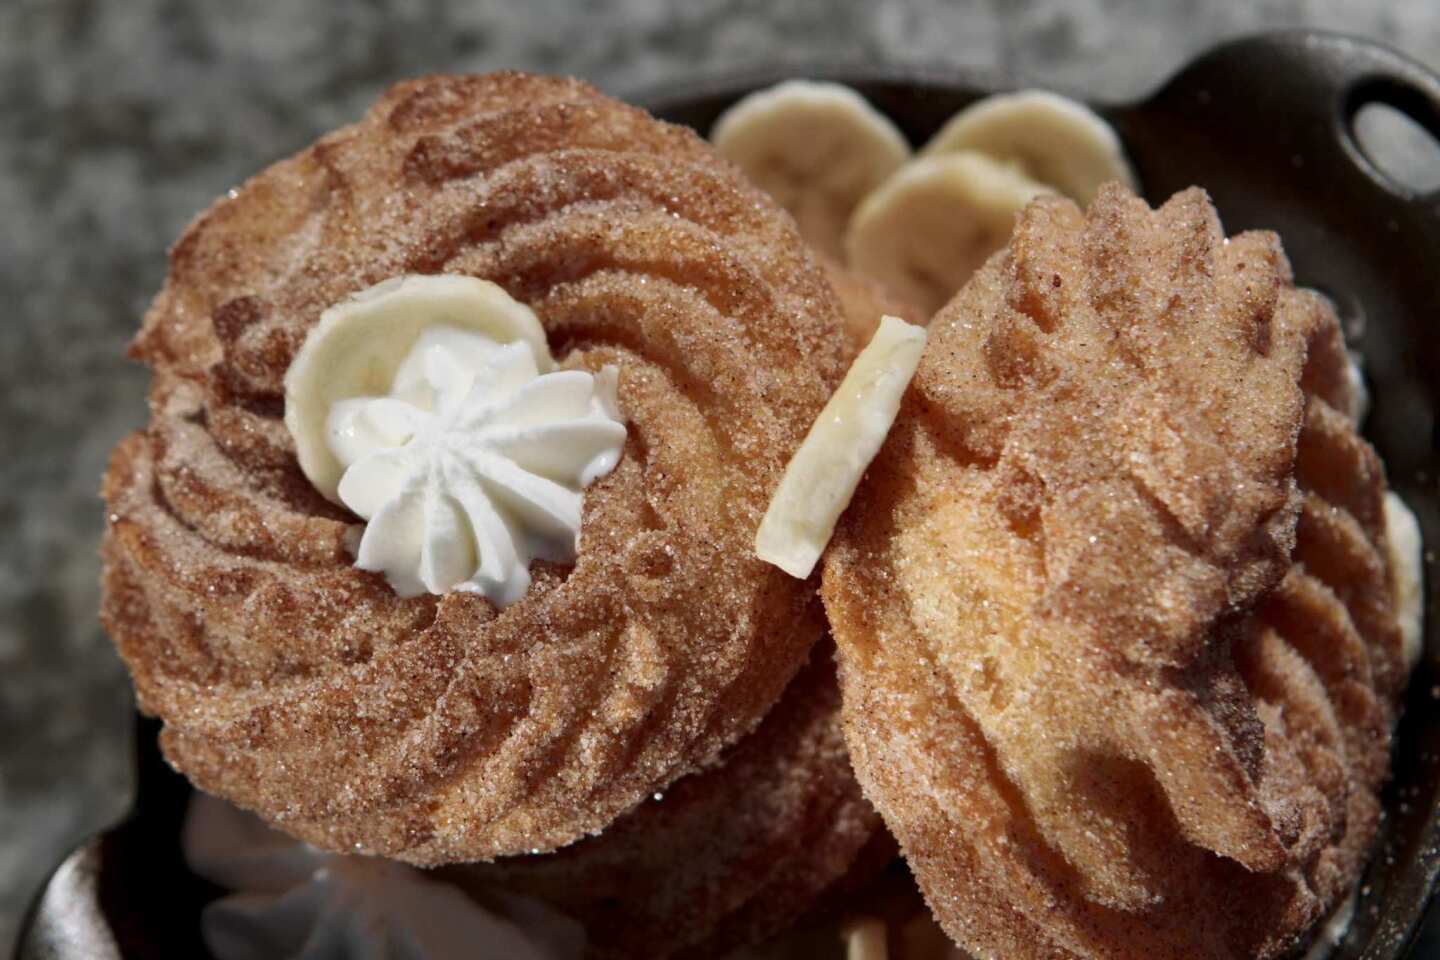 Despite the restaurant's modernist tendencies, the crullers appear untouched by science.